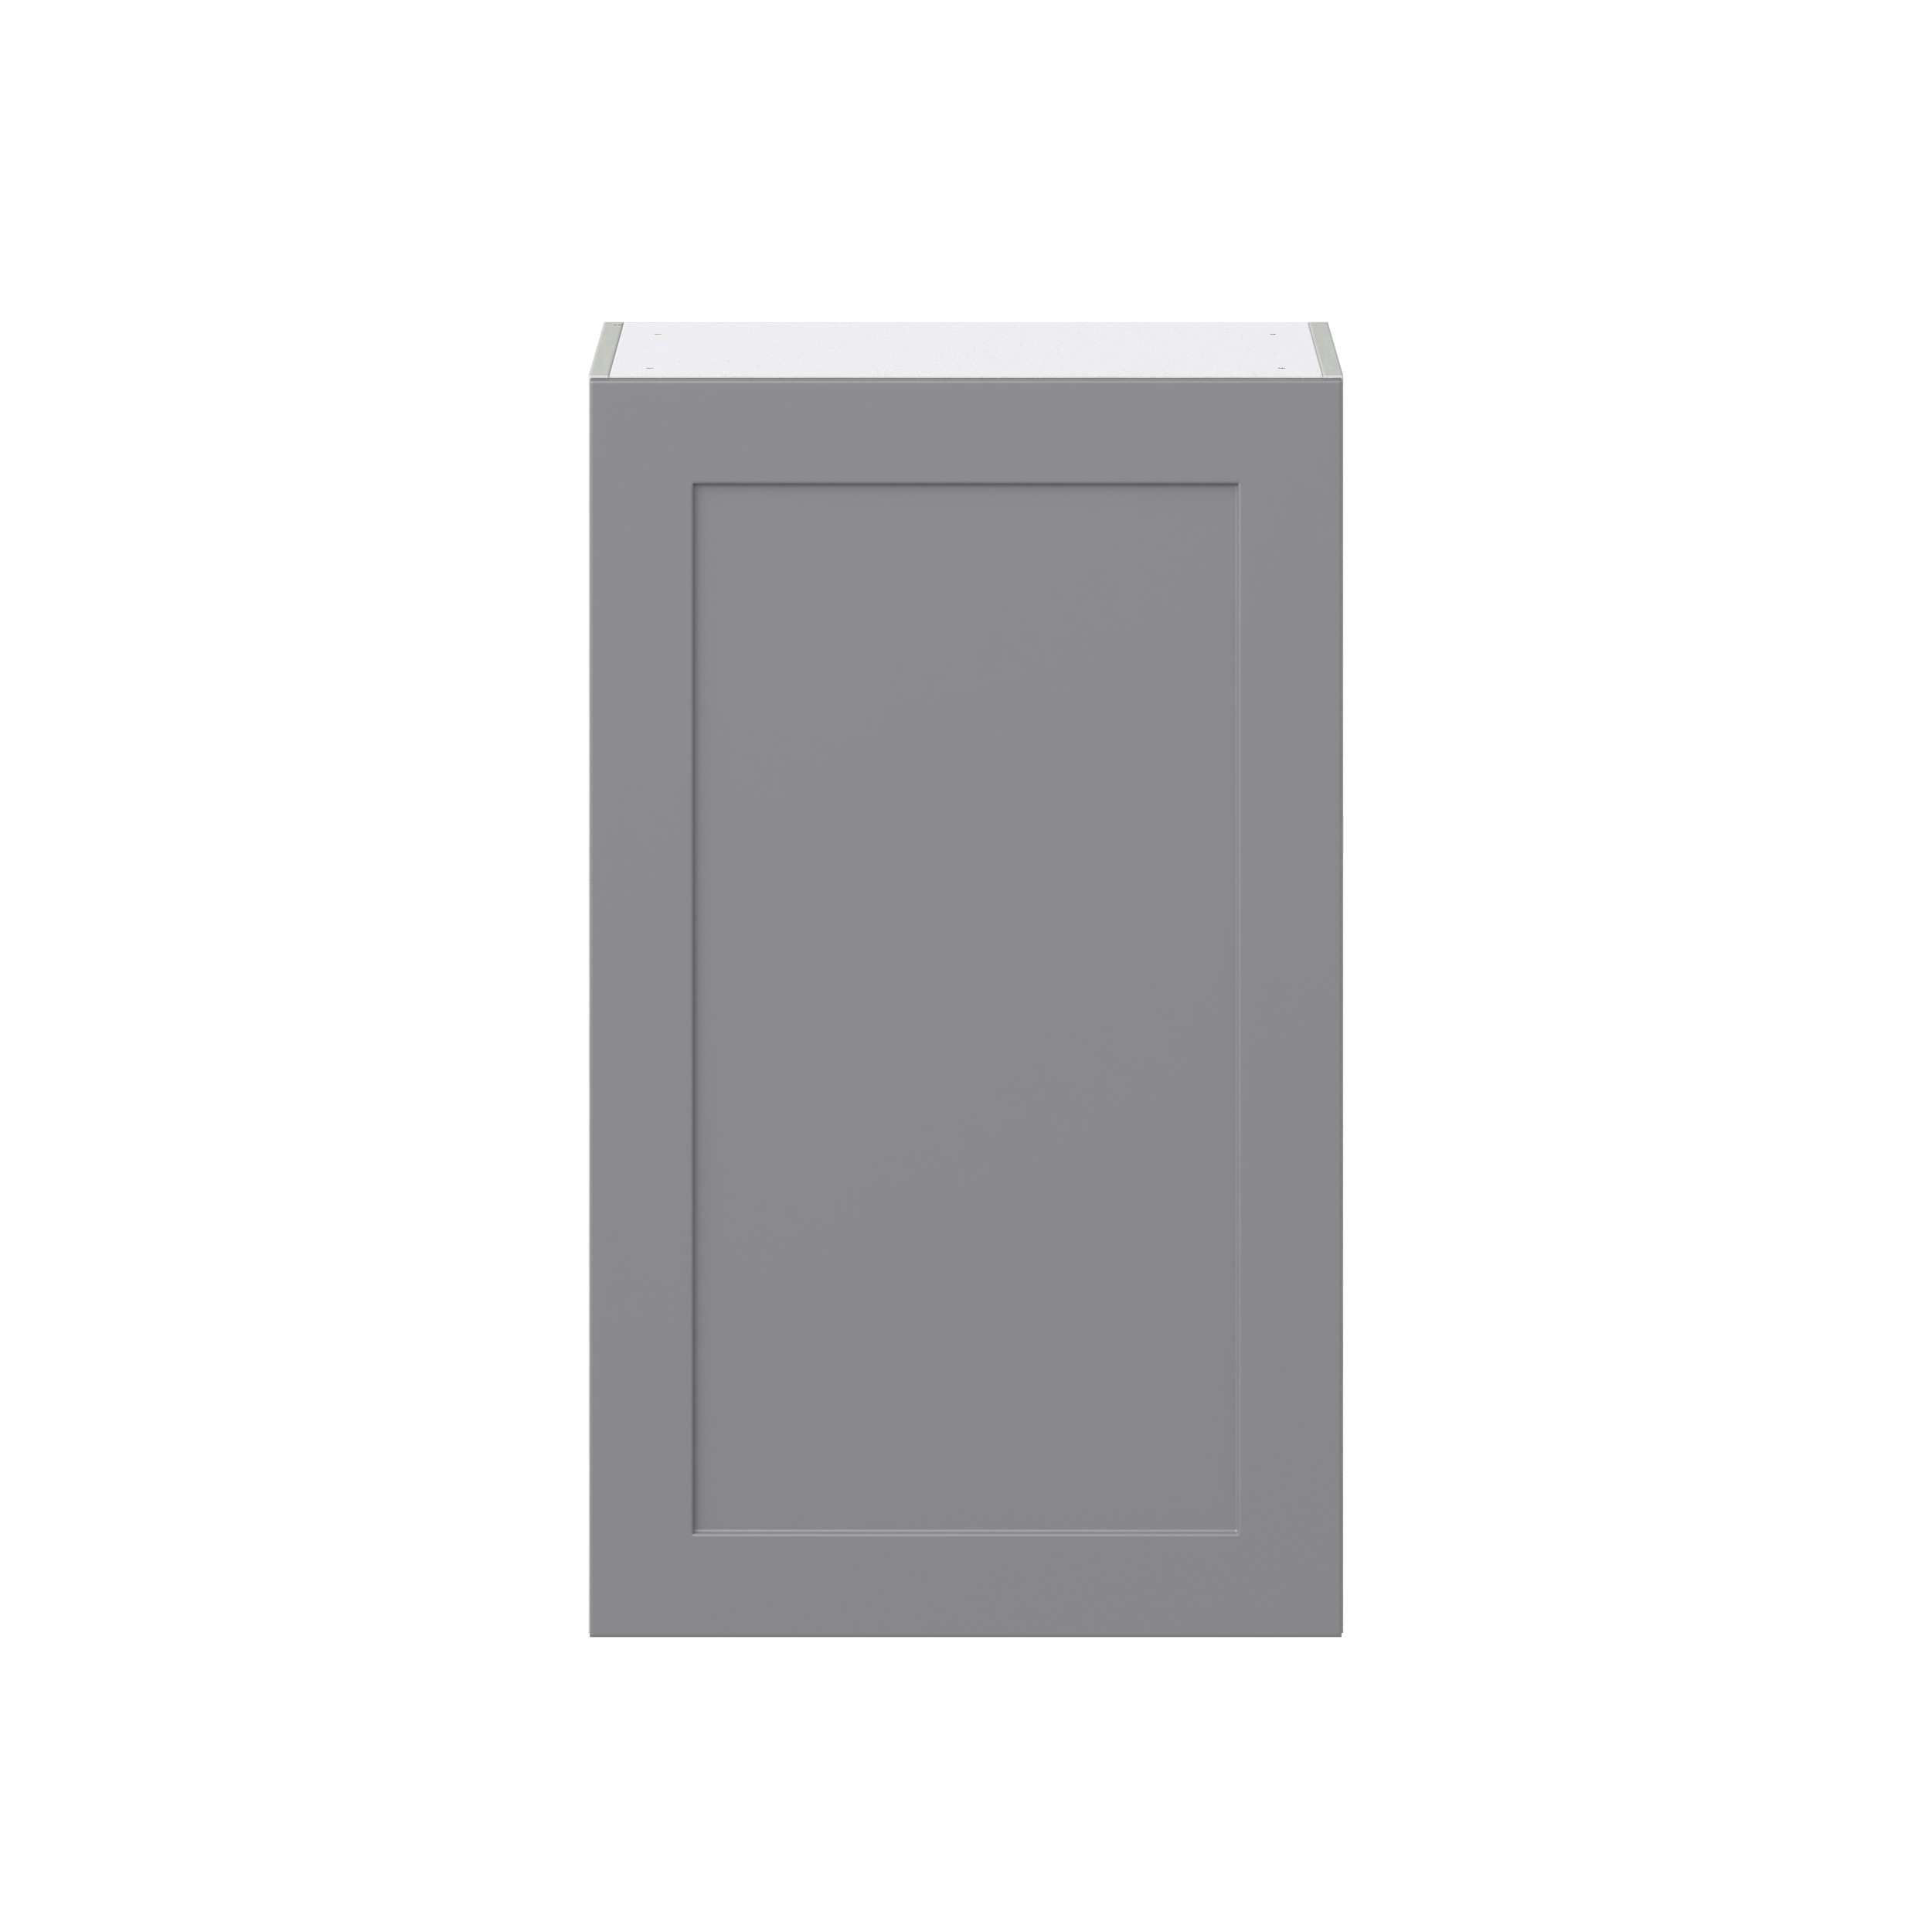 Willow Painted Slate Gray Shaker Assembled Wall Cabinet with Full High Door (24 in. W x 40 in. H x 14 in. D)